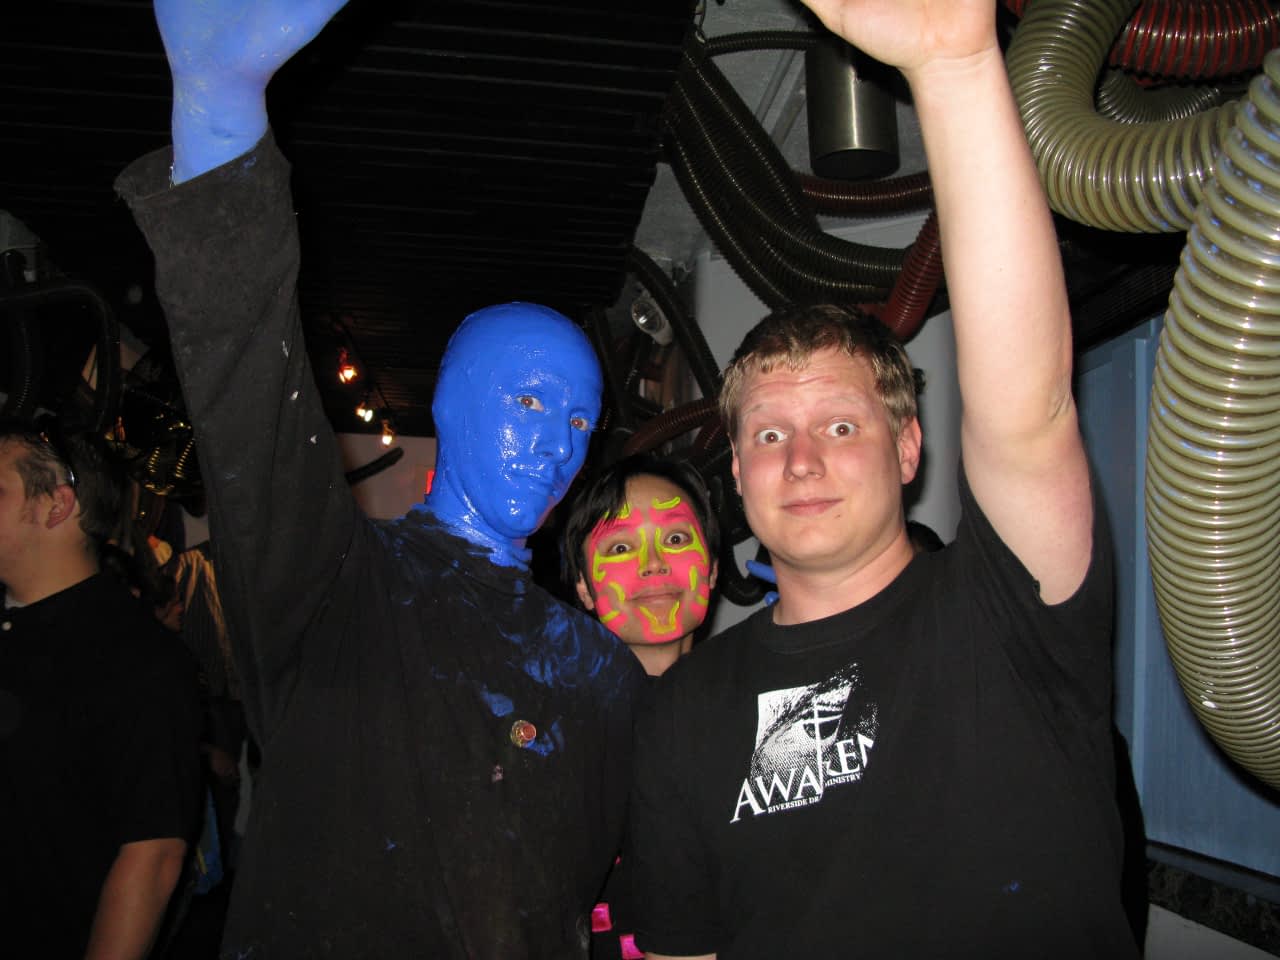 Pat with Blue Man and musician